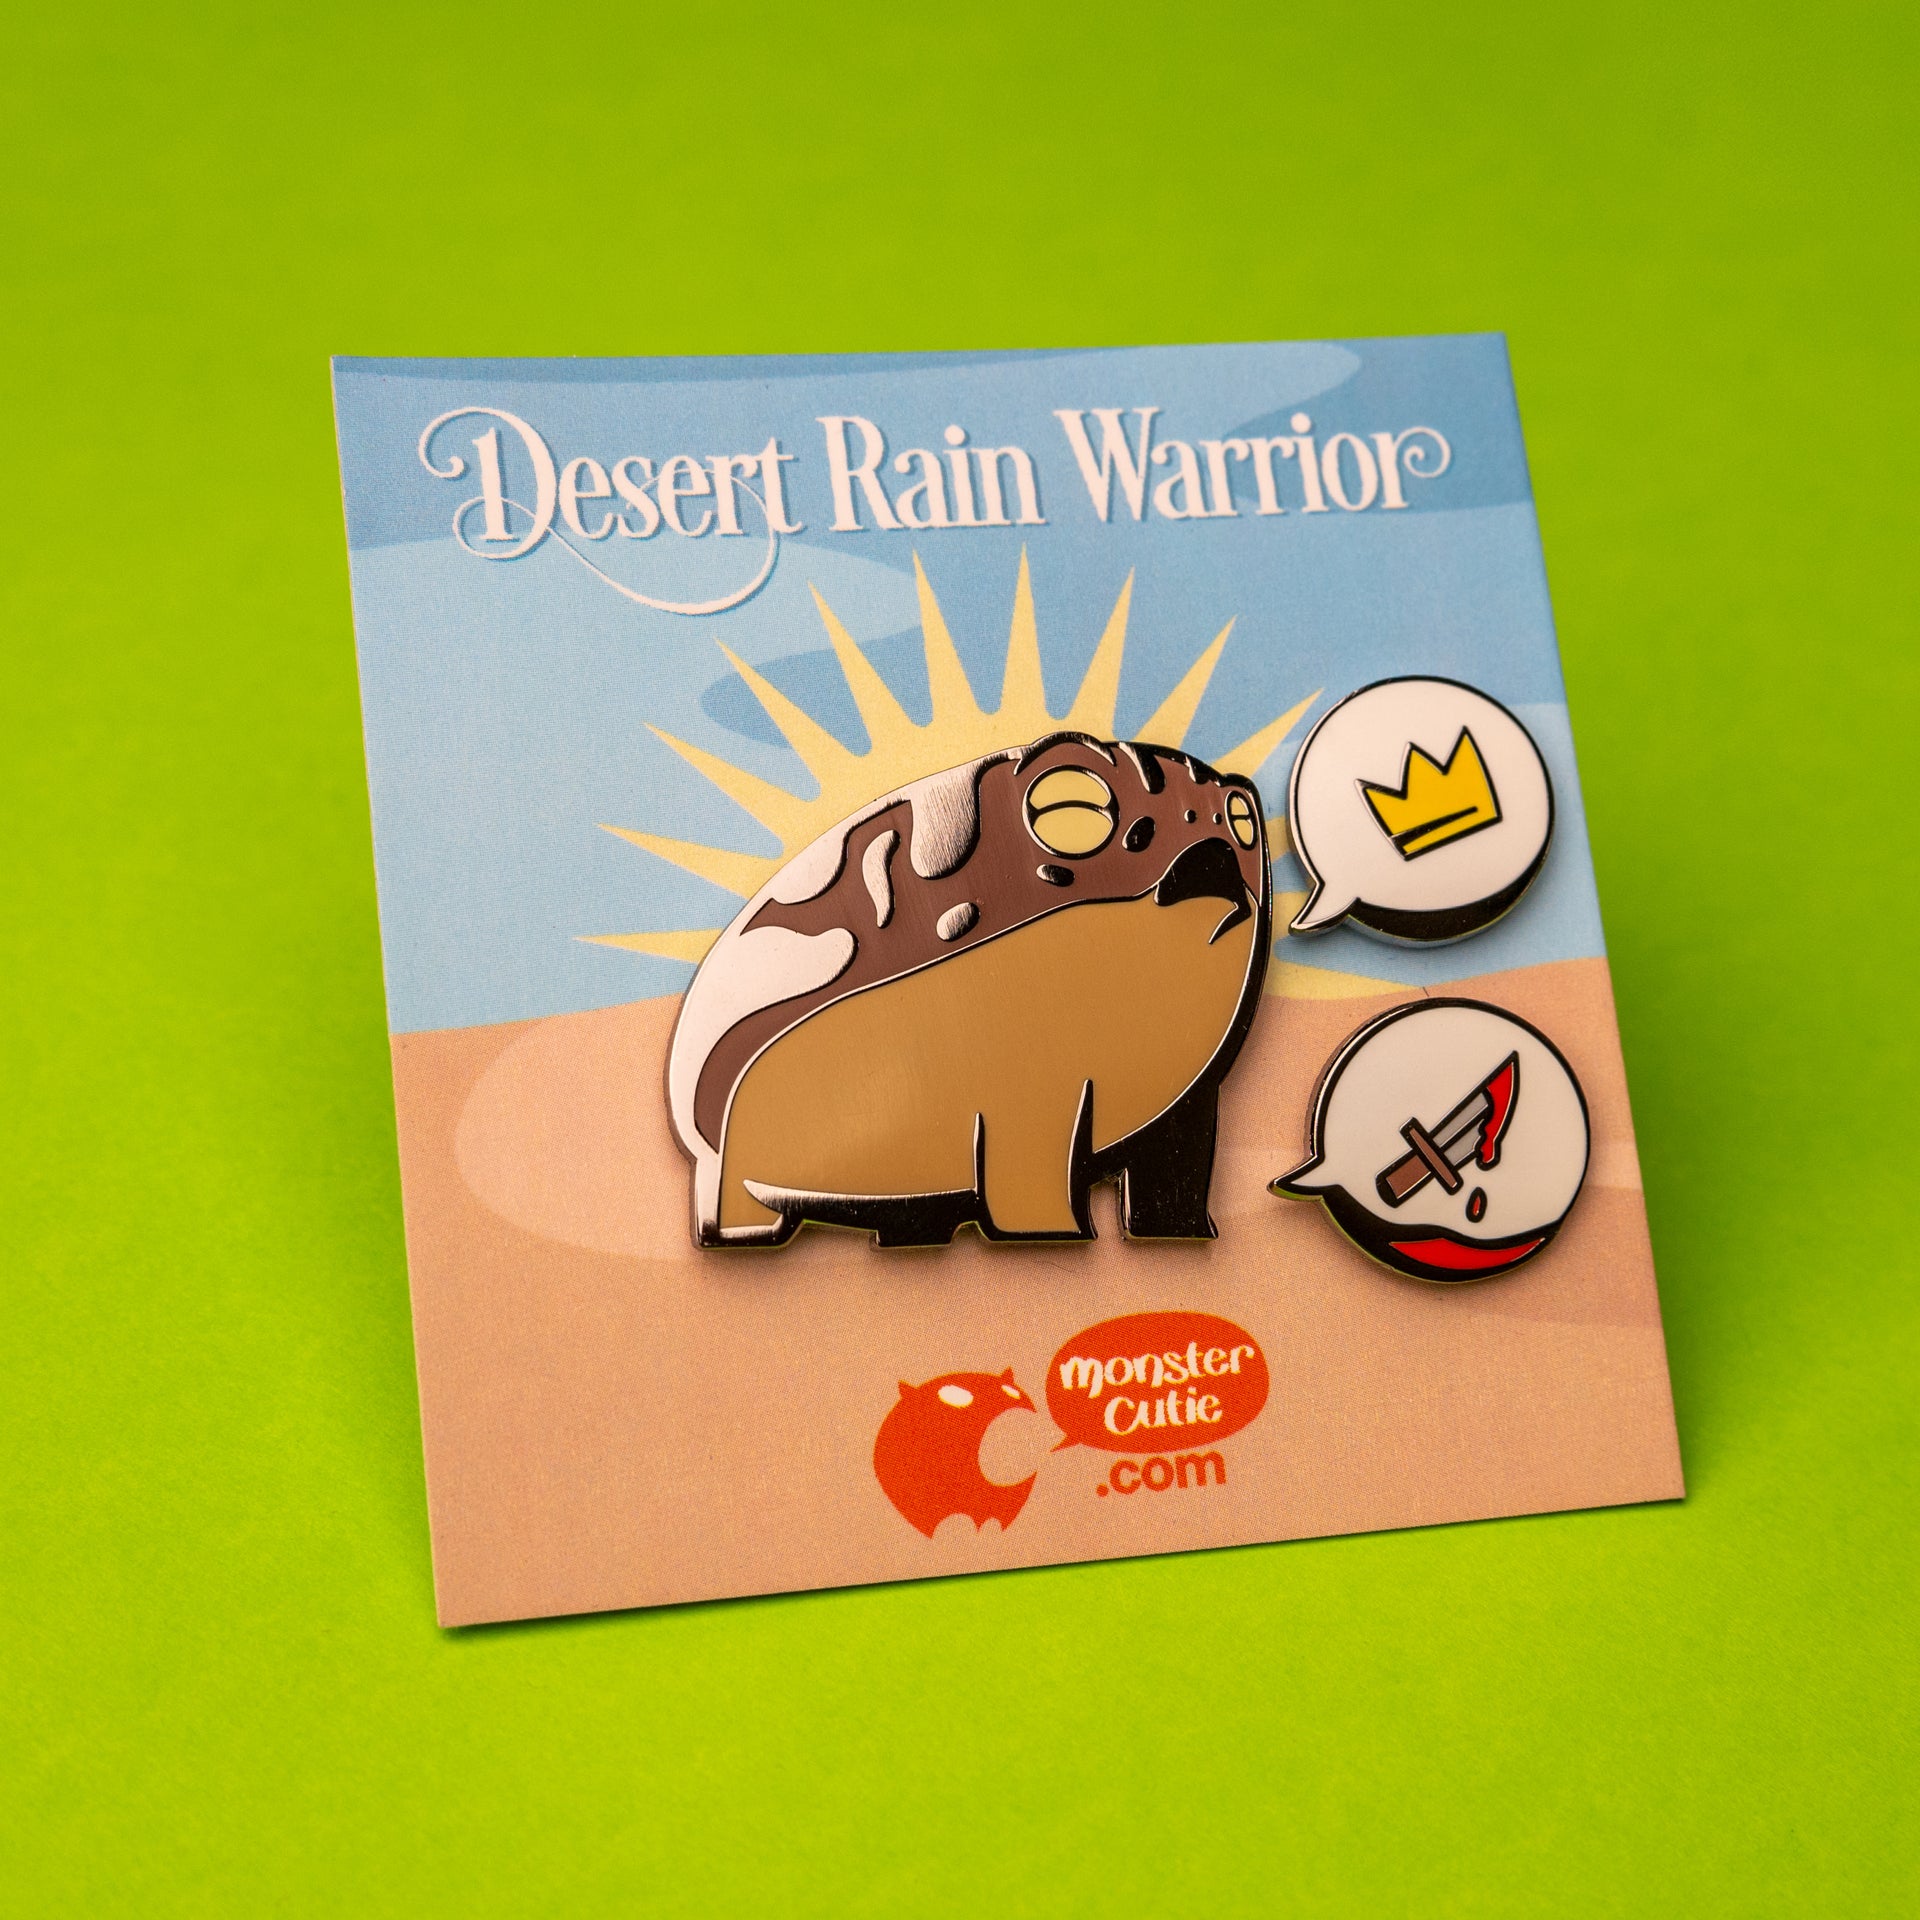 Weather Frog Pin - DNO